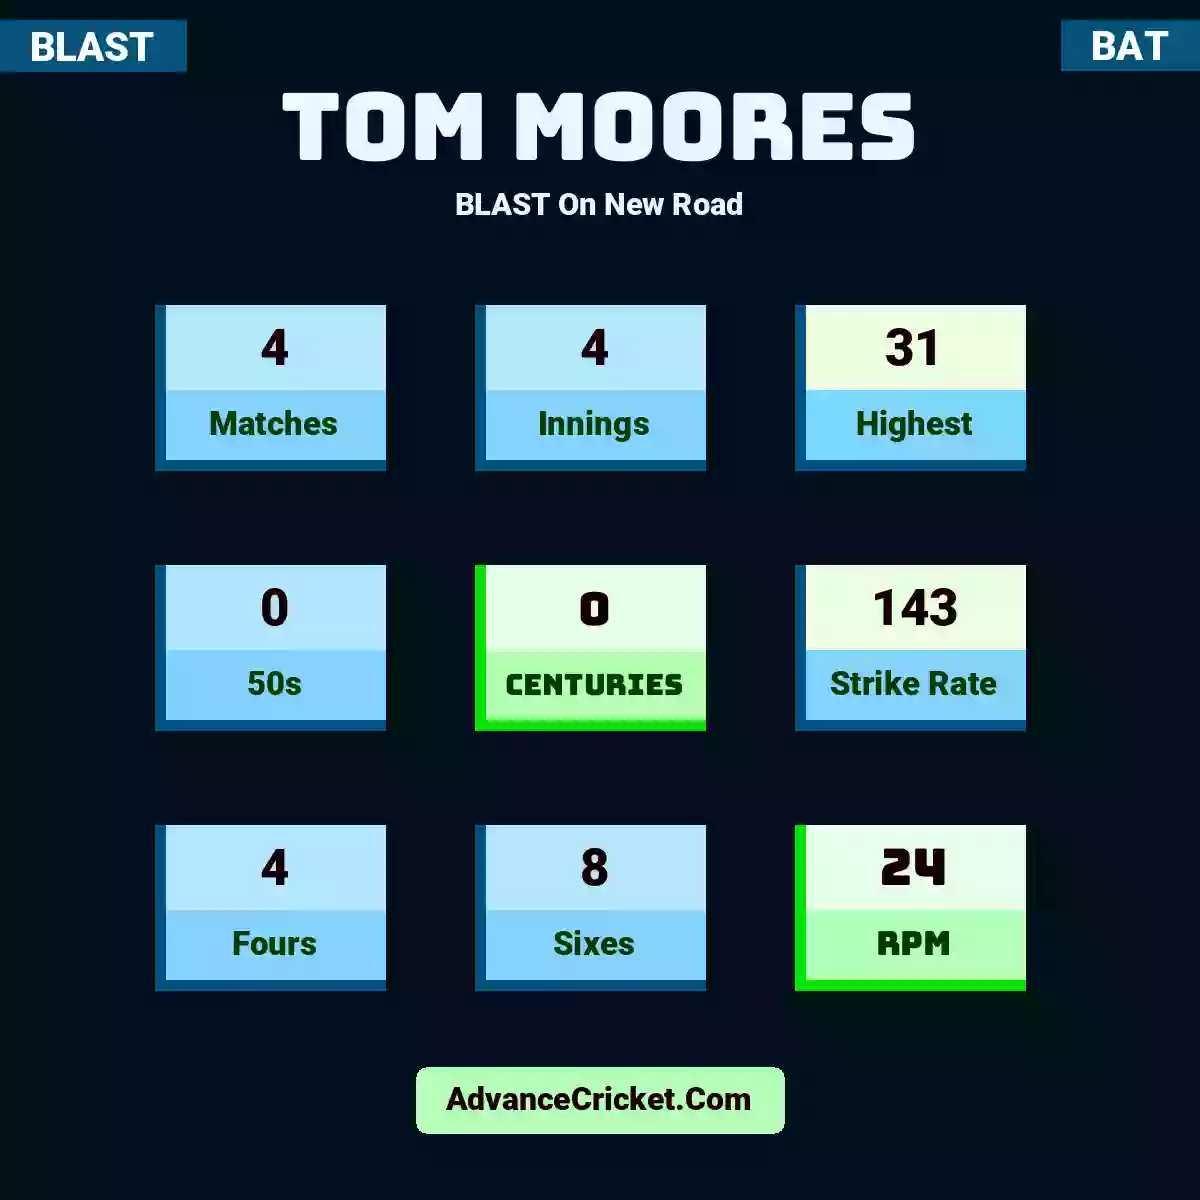 Tom Moores BLAST  On New Road, Tom Moores played 4 matches, scored 31 runs as highest, 0 half-centuries, and 0 centuries, with a strike rate of 143. T.Moores hit 4 fours and 8 sixes, with an RPM of 24.